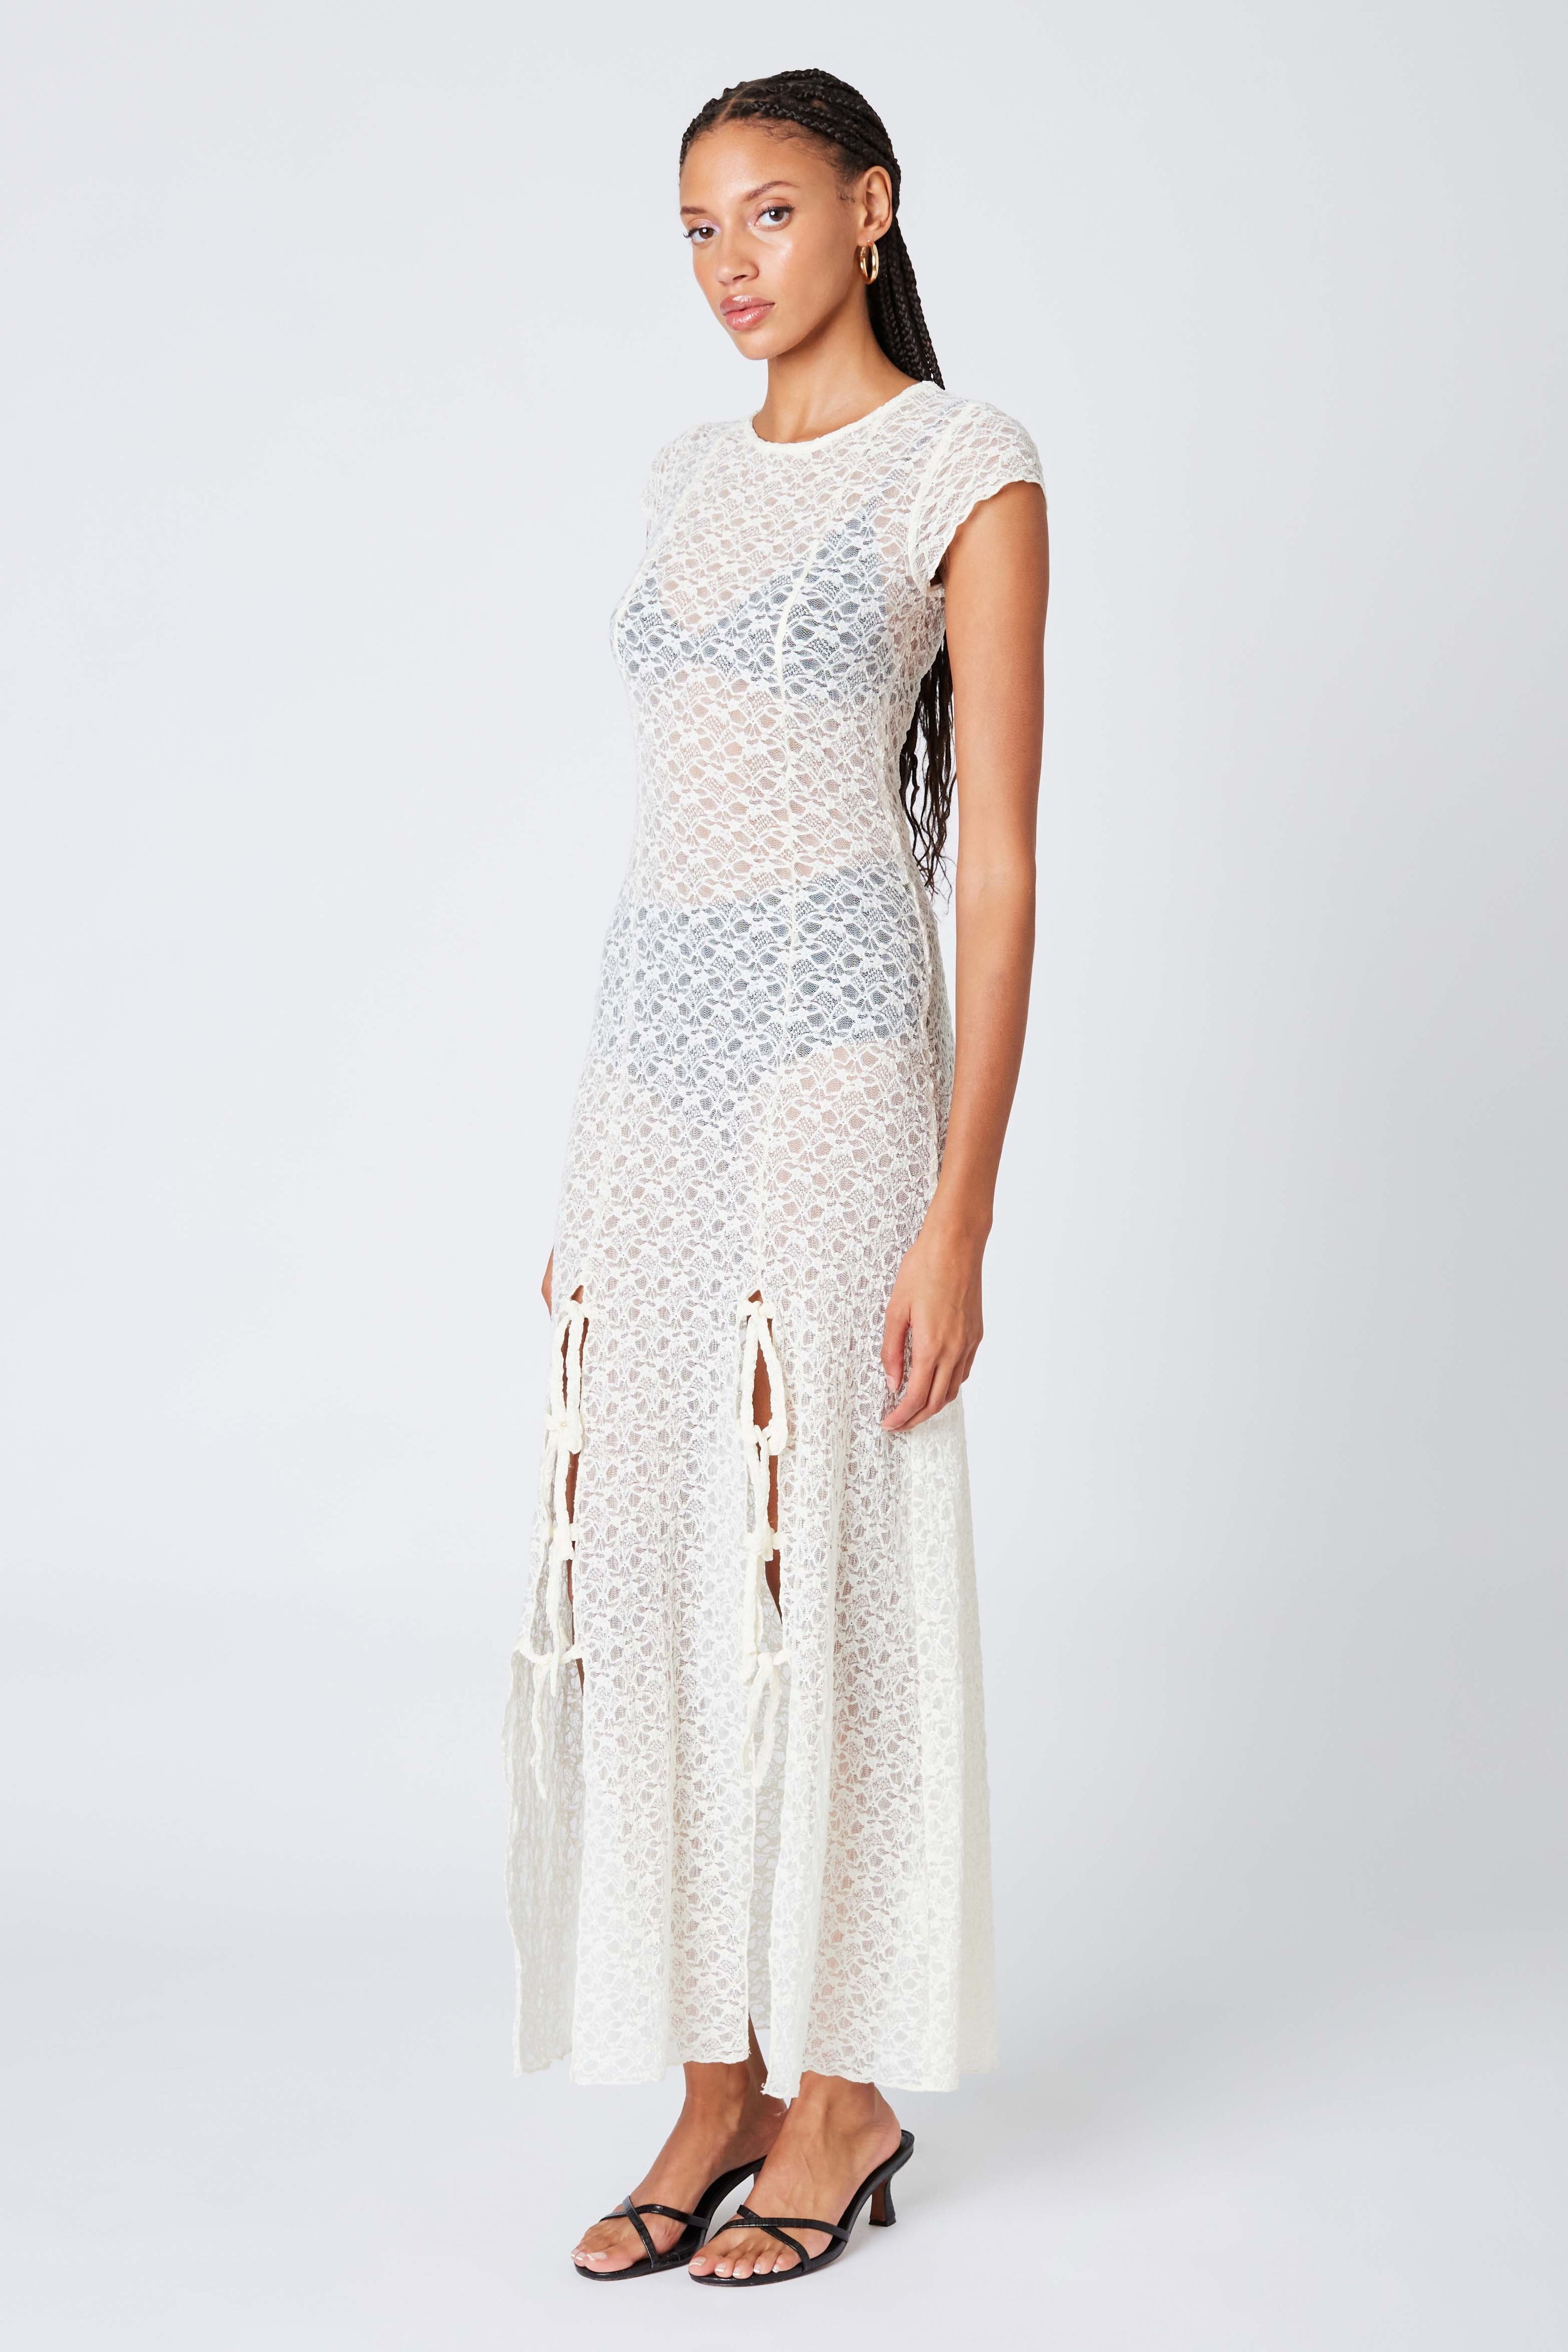 Ivory Lace See Through Maxi Dress